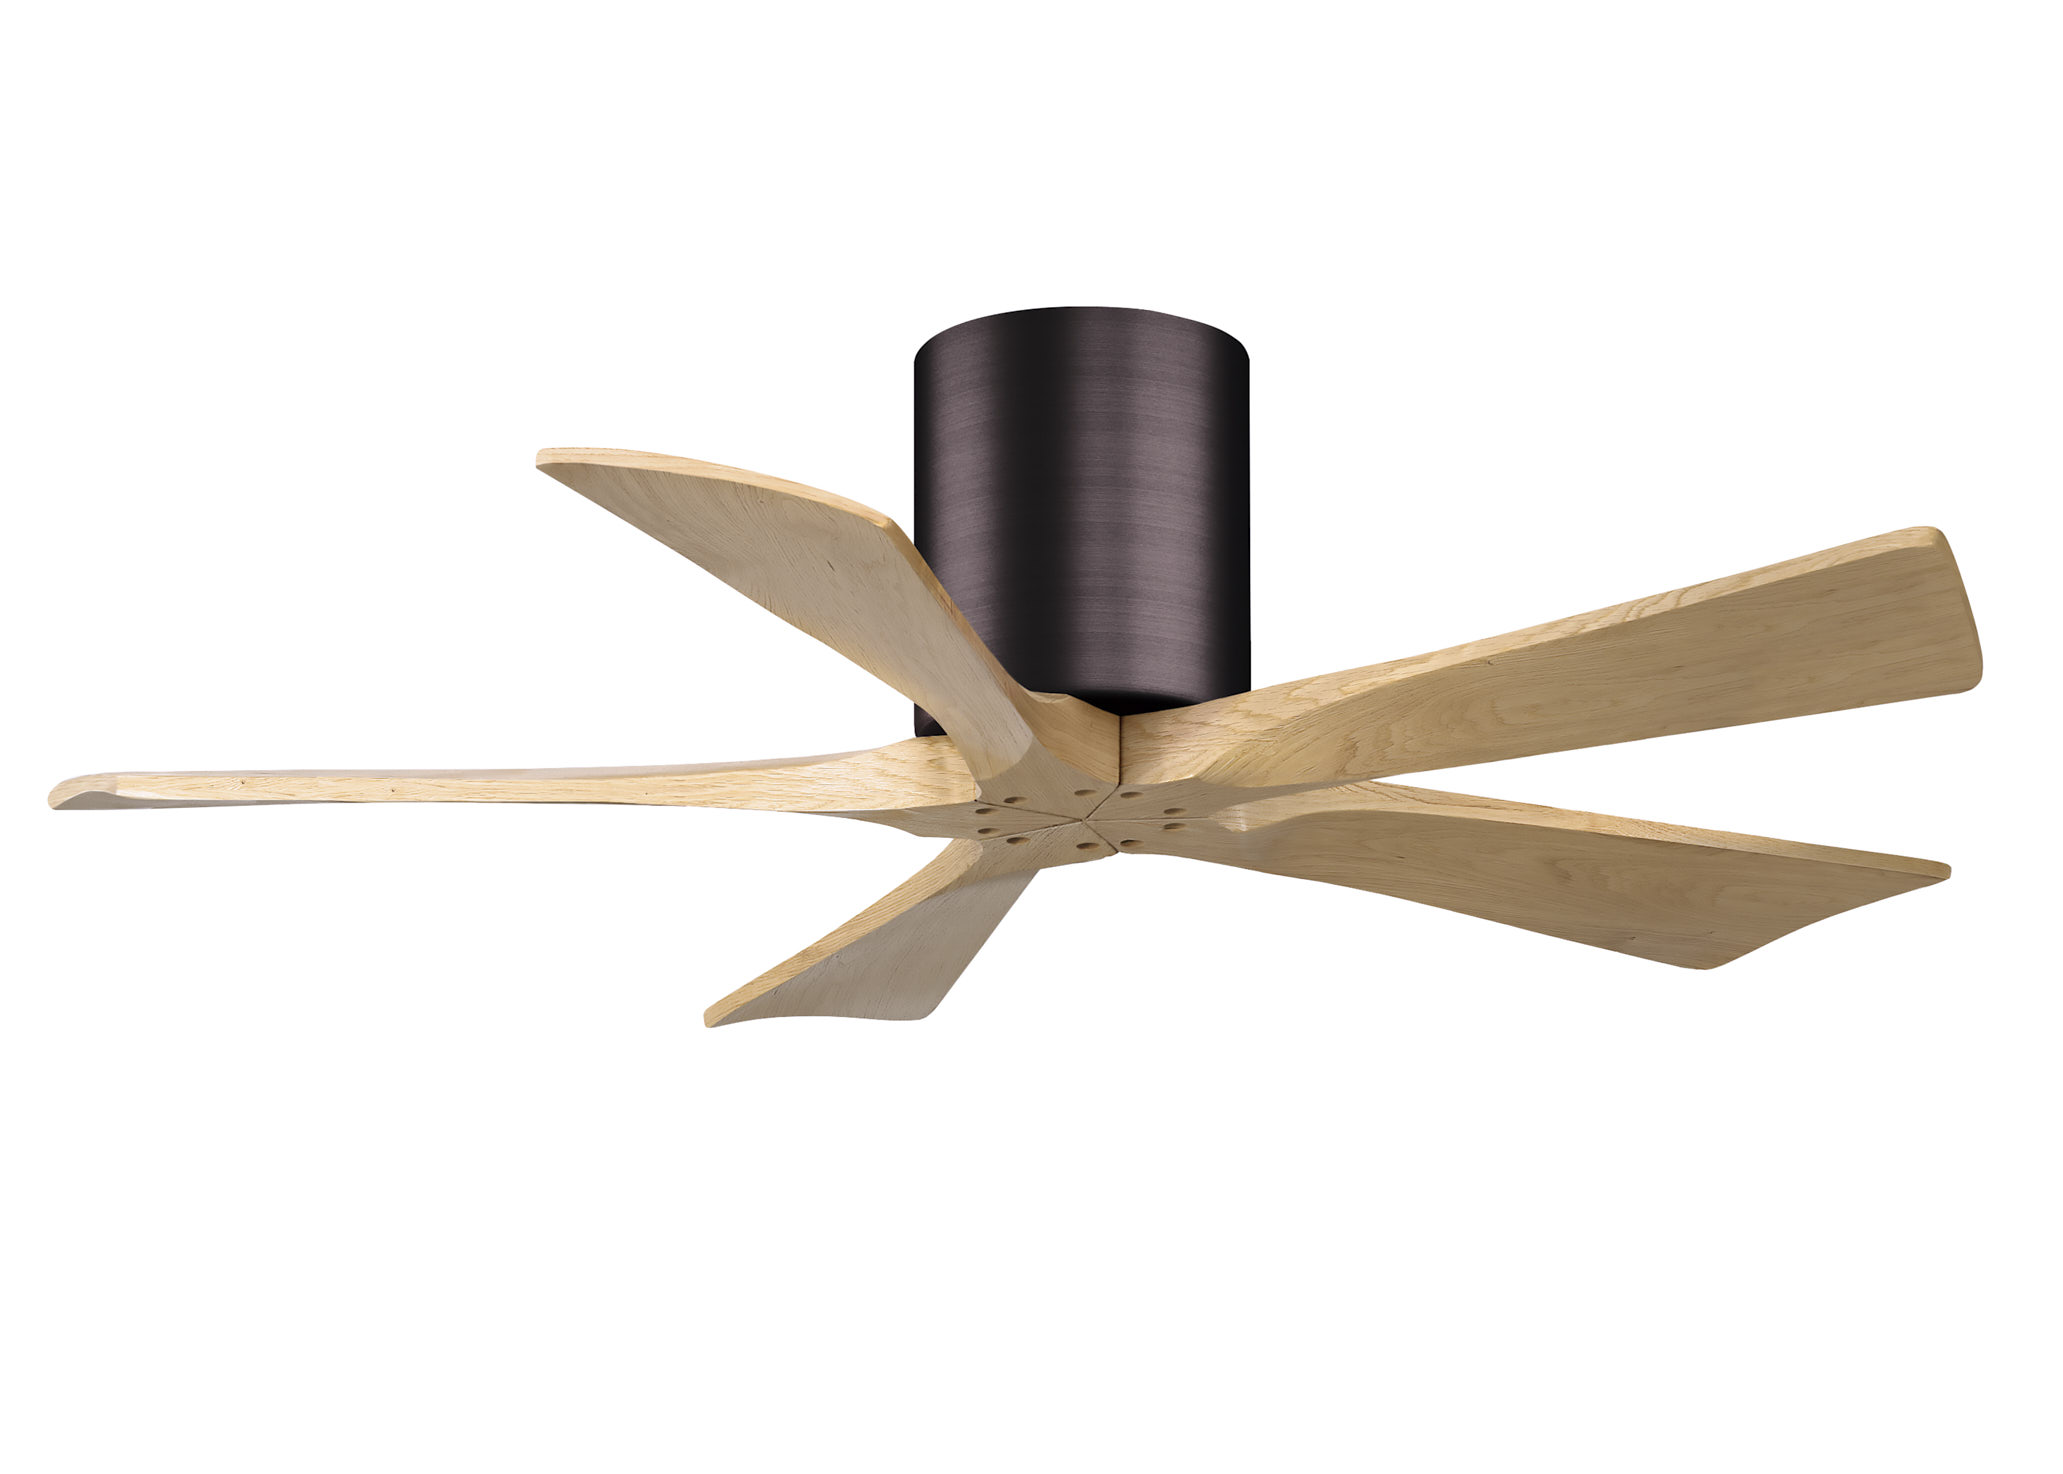 Irene-5H 6-speed ceiling fan in brushed bronze finish with 42